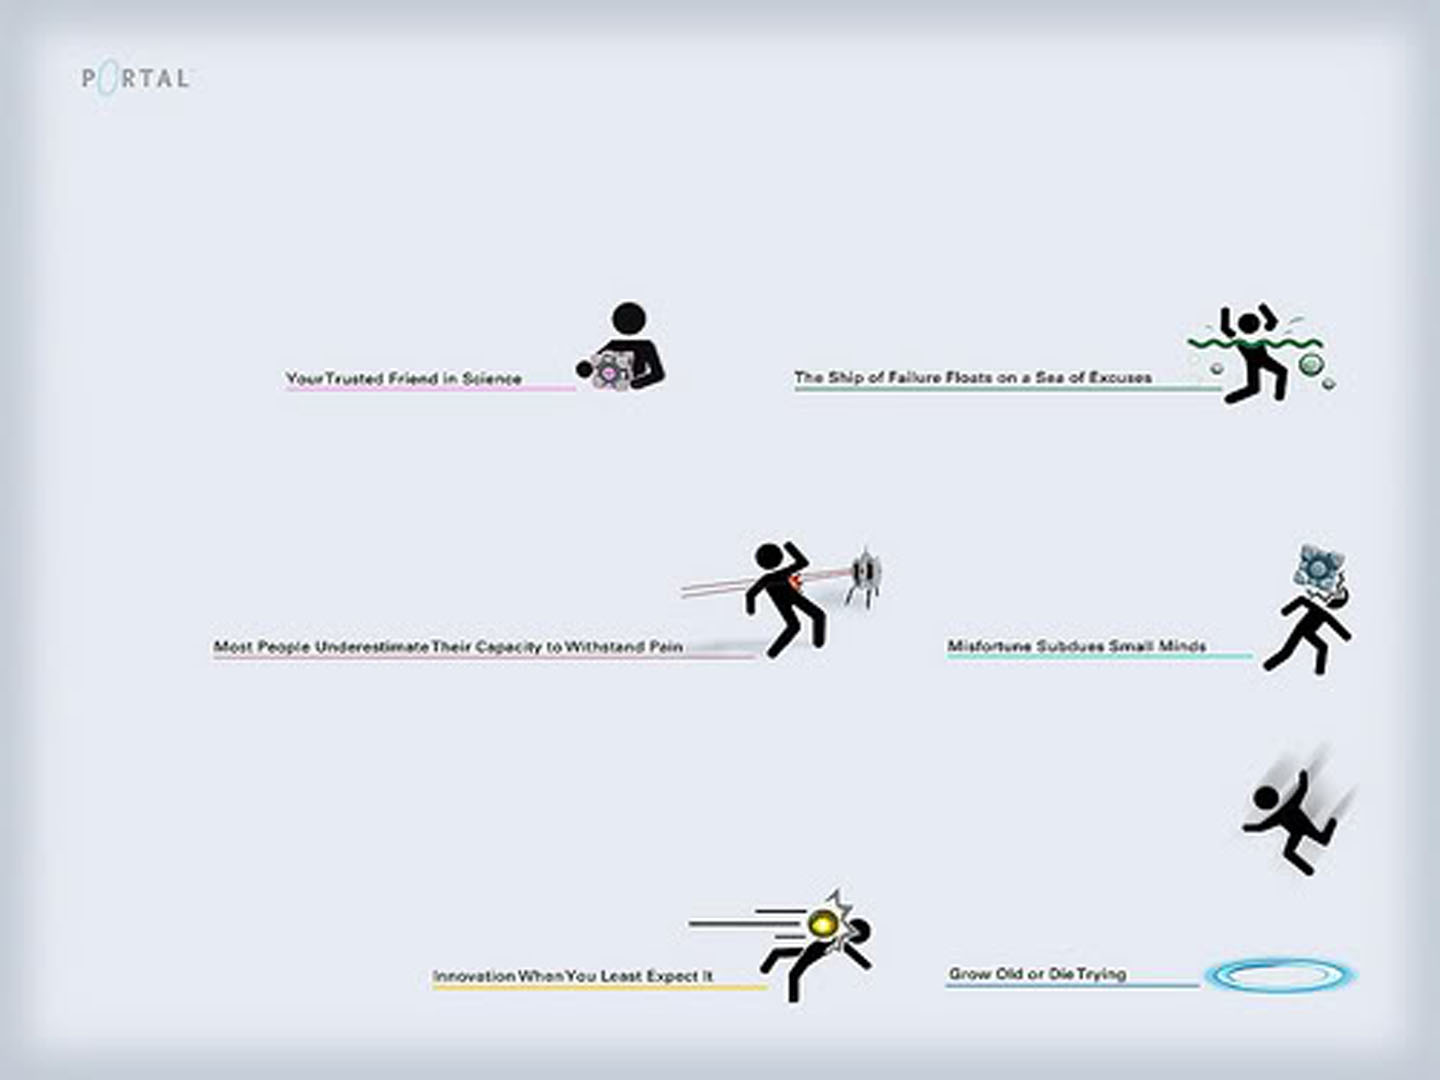 Health And Safety Advice - Portal 2 Wallpaper